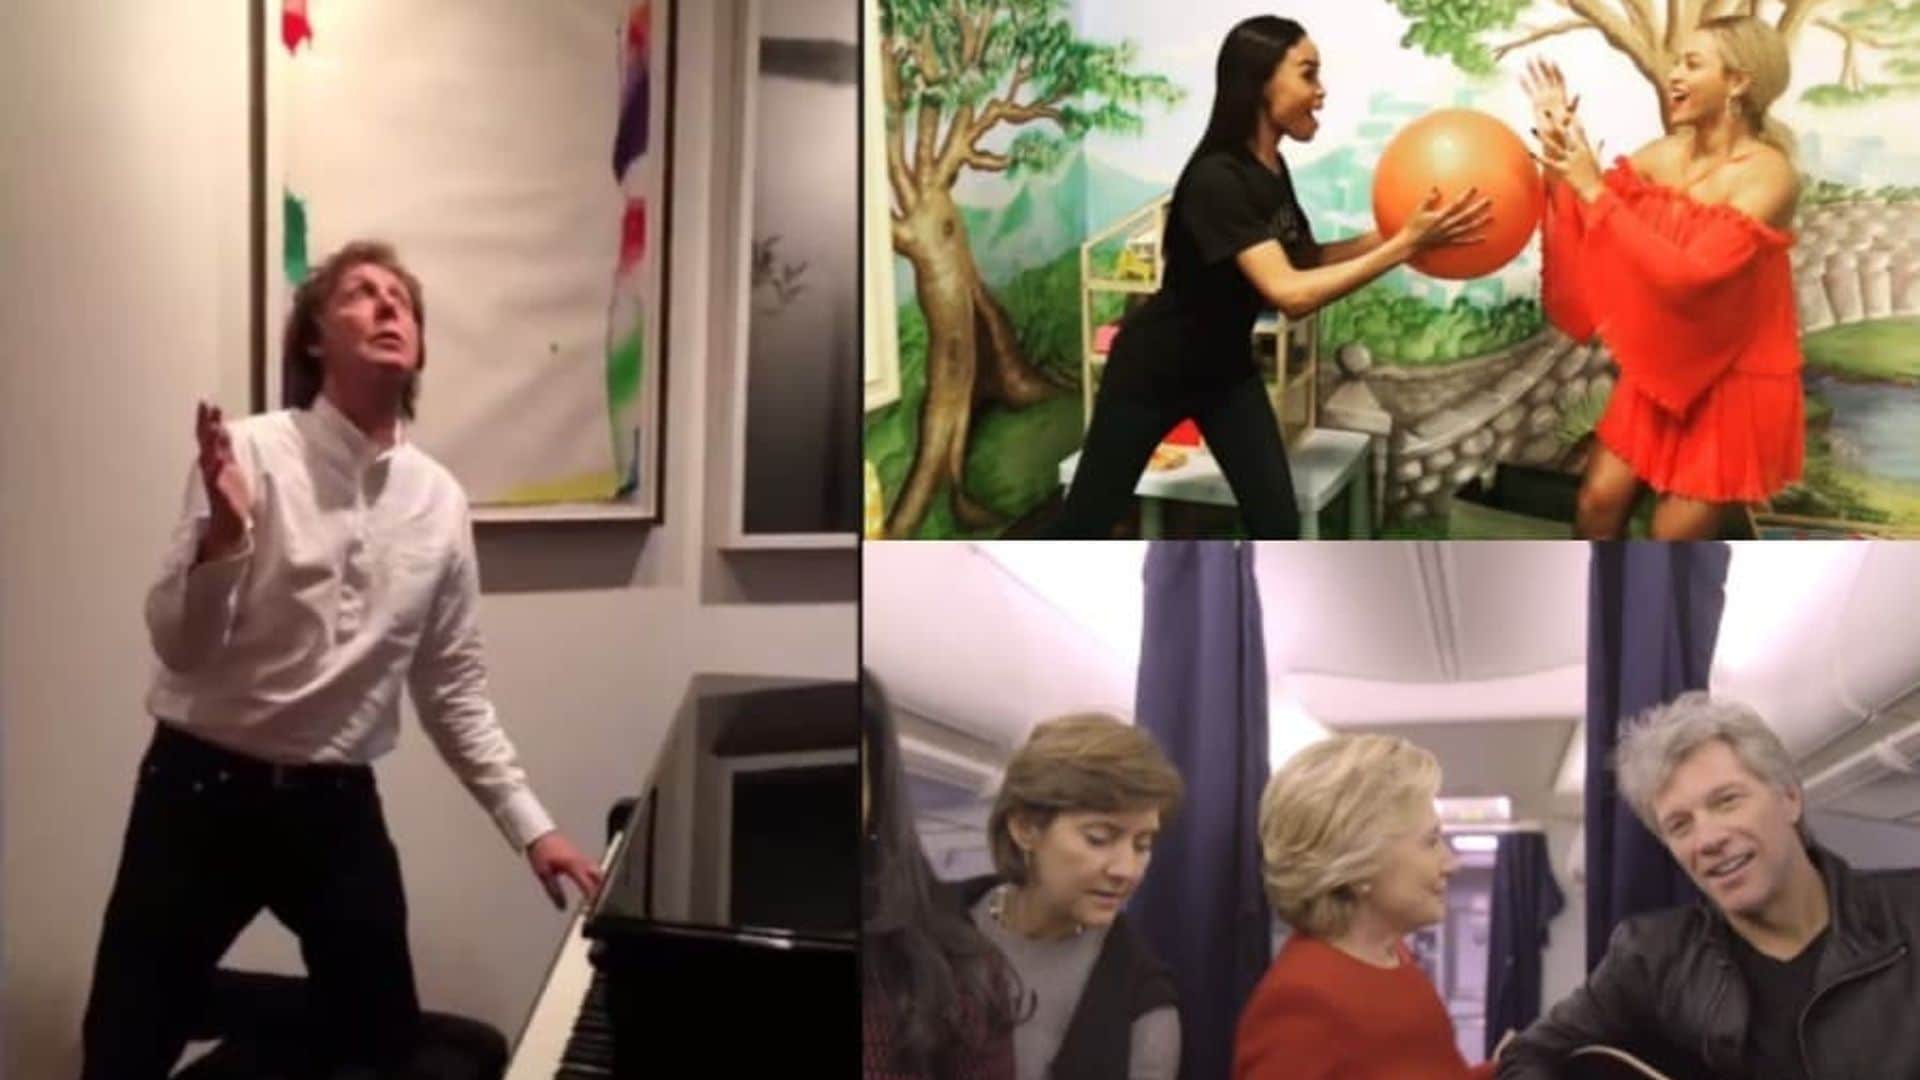 Michelle Obama, Hillary Clinton and more celebrities having fun with the Mannequin Challenge